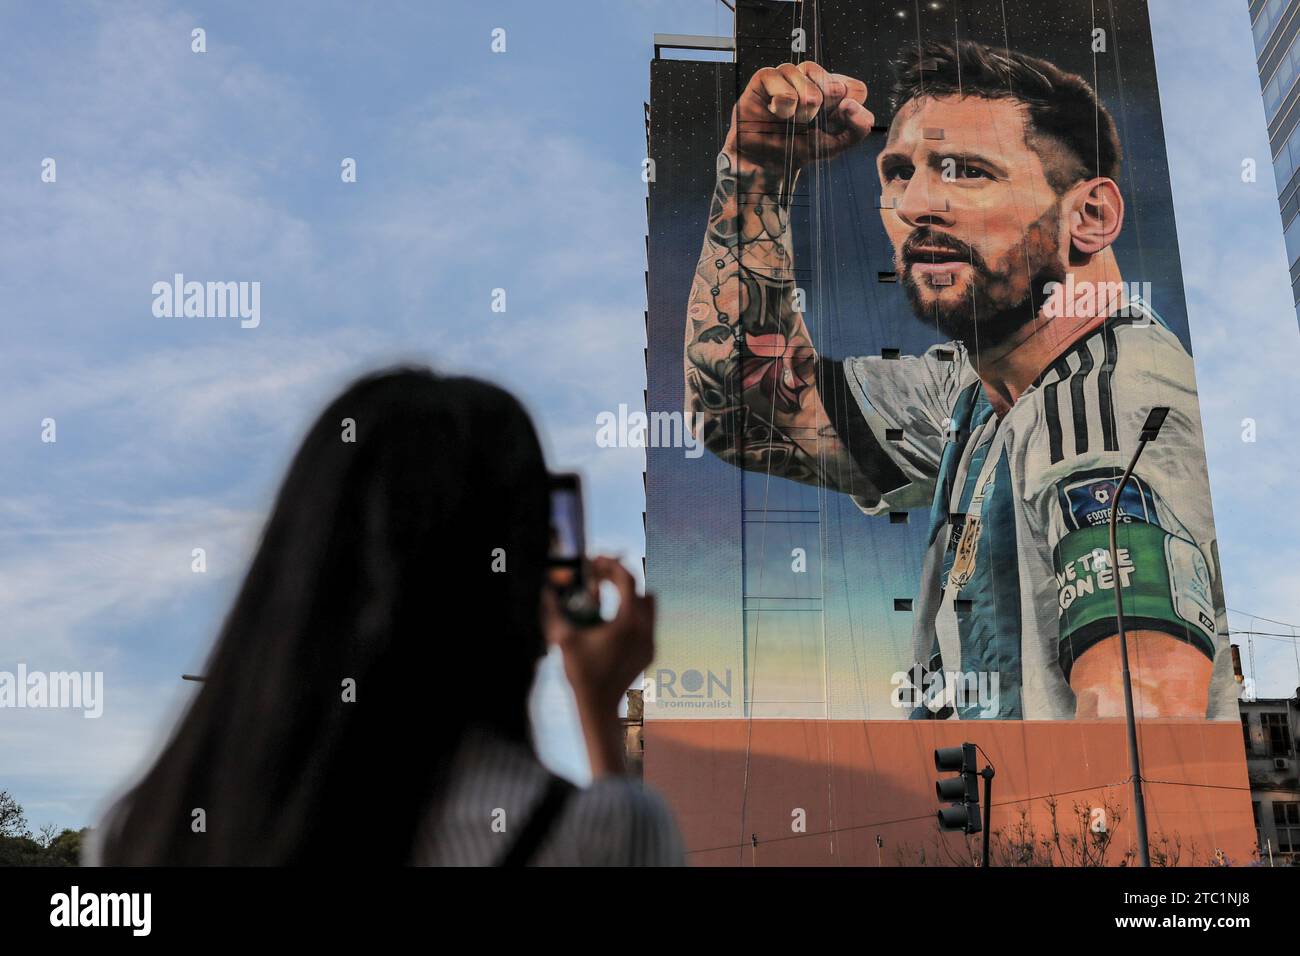 A woman takes a photo of a mural of the Lionel Messi soccer team before the change of government amid economic and social upheaval. President-elect Javier Milei of La Libertad Avanza, a far-right libertarian who burst onto the Argentine political scene with eccentric and radical proposals, will take office on Sunday, December 10, replacing incumbent Peronist Alberto Fernández. Milei describes himself as an 'anarcho-capitalist' libertarian who wants to drastically reduce the size of the state and replace the local peso with the US dollar. The new administration will face the challenge of reduci Stock Photo